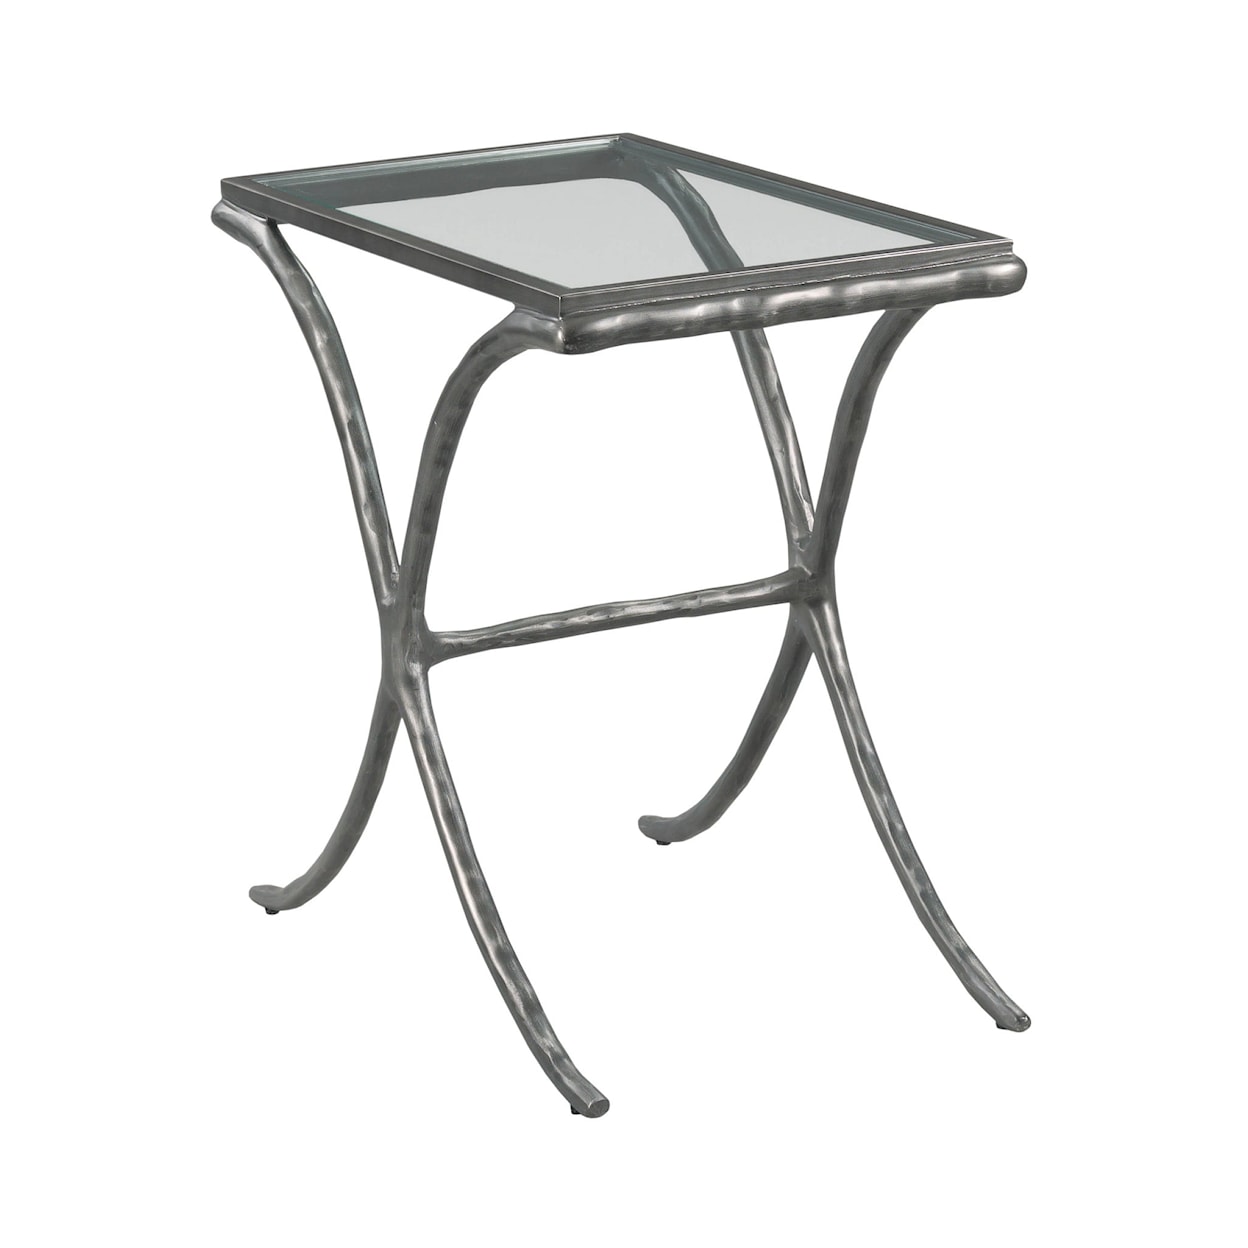 Kincaid Furniture Milan-Acquisitions Chairside Table